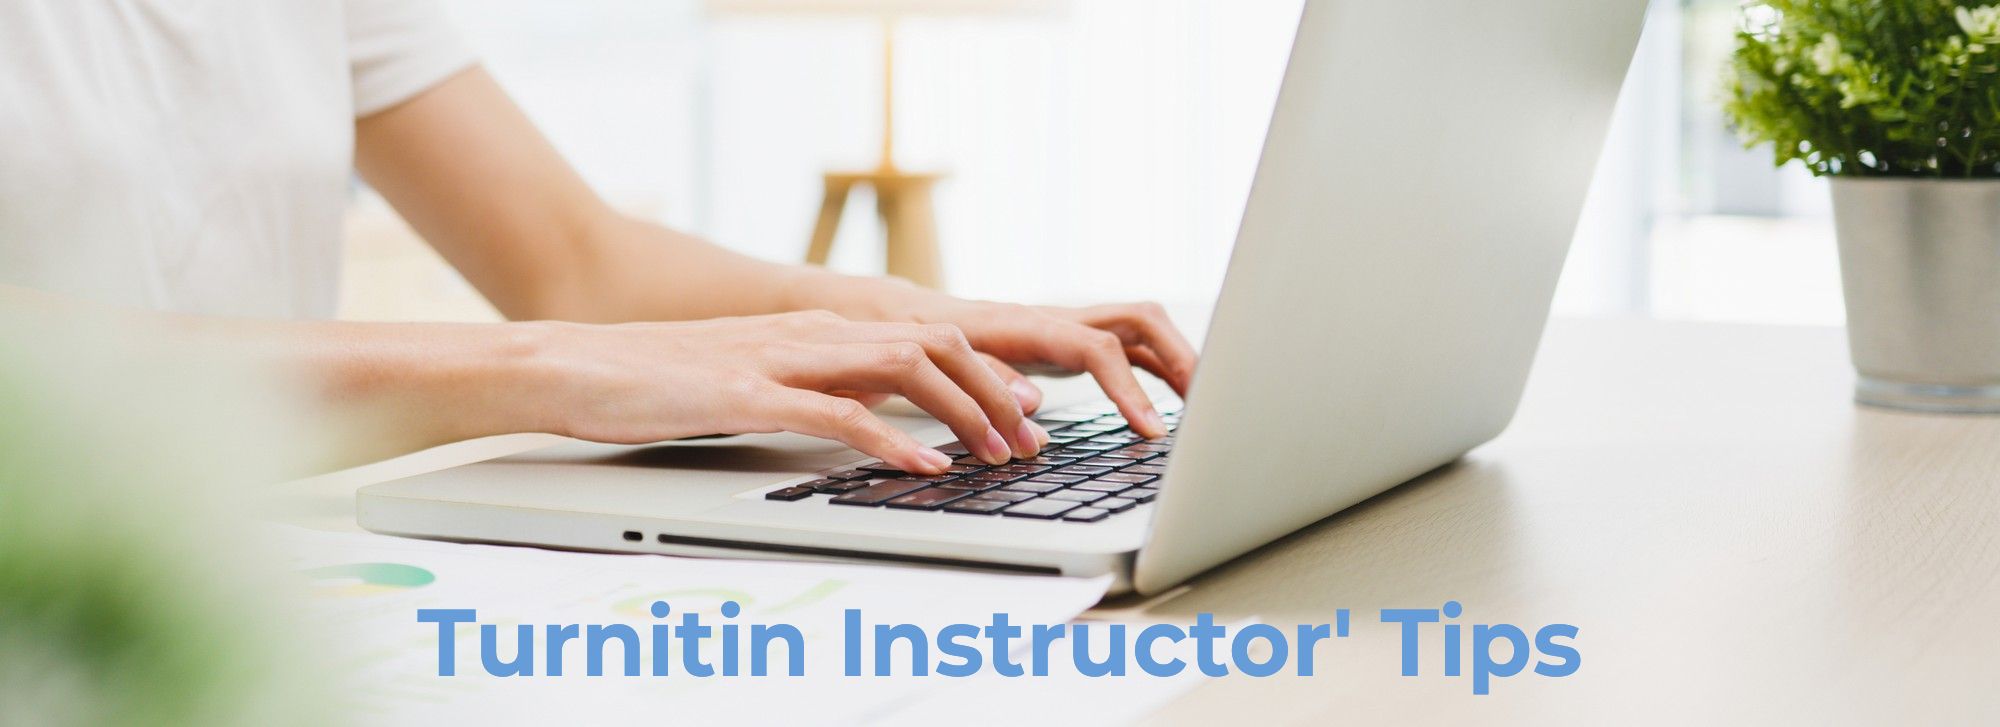 Turnitin instructor's tips